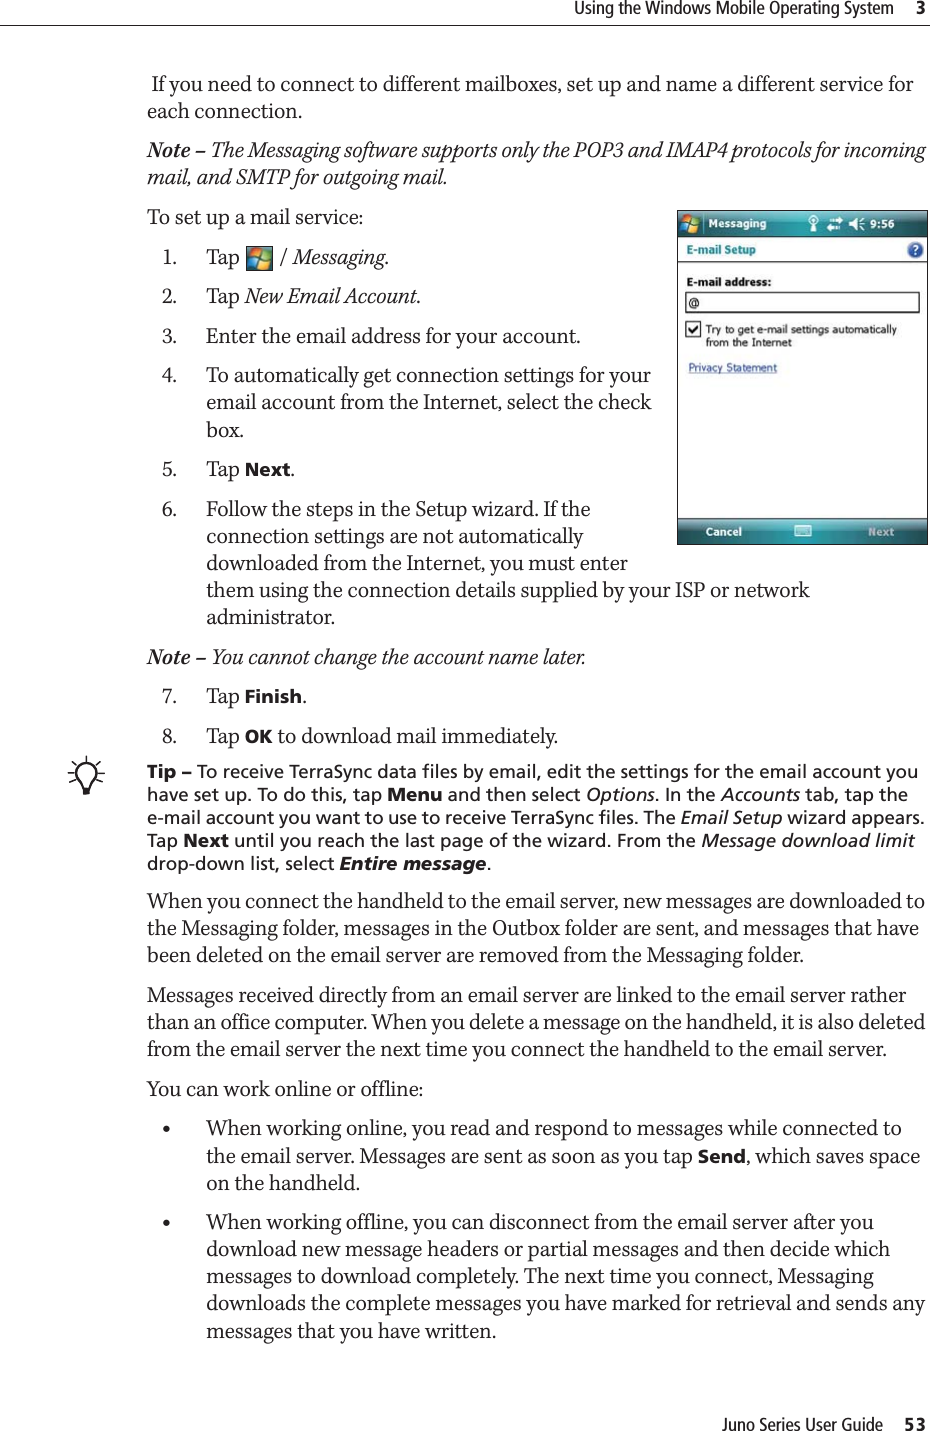 Juno Series User Guide     53Using the Windows Mobile Operating System     3 If you need to connect to different mailboxes, set up and name a different service for each connection. Note – The Messaging software supports only the POP3 and IMAP4 protocols for incoming mail, and SMTP for outgoing mail.To set up a mail service:1. Tap / Messaging.2. Tap New Email Account.3. Enter the email address for your account.4. To automatically get connection settings for your email account from the Internet, select the check box.5. Tap Next.6. Follow the steps in the Setup wizard. If the connection settings are not automatically downloaded from the Internet, you must enter them using the connection details supplied by your ISP or network administrator.Note – You cannot change the account name later. 7. Tap Finish.8. Tap OK to download mail immediately.BTip – To receive TerraSync data files by email, edit the settings for the email account you have set up. To do this, tap Menu and then select Options. In the Accounts tab, tap the e-mail account you want to use to receive TerraSync files. The Email Setup wizard appears. Tap Next until you reach the last page of the wizard. From the Message download limit drop-down list, select Entire message. When you connect the handheld to the email server, new messages are downloaded to the Messaging folder, messages in the Outbox folder are sent, and messages that have been deleted on the email server are removed from the Messaging folder.Messages received directly from an email server are linked to the email server rather than an office computer. When you delete a message on the handheld, it is also deleted from the email server the next time you connect the handheld to the email server.You can work online or offline:•When working online, you read and respond to messages while connected to the email server. Messages are sent as soon as you tap Send, which saves space on the handheld. •When working offline, you can disconnect from the email server after you download new message headers or partial messages and then decide which messages to download completely. The next time you connect, Messaging downloads the complete messages you have marked for retrieval and sends any messages that you have written.